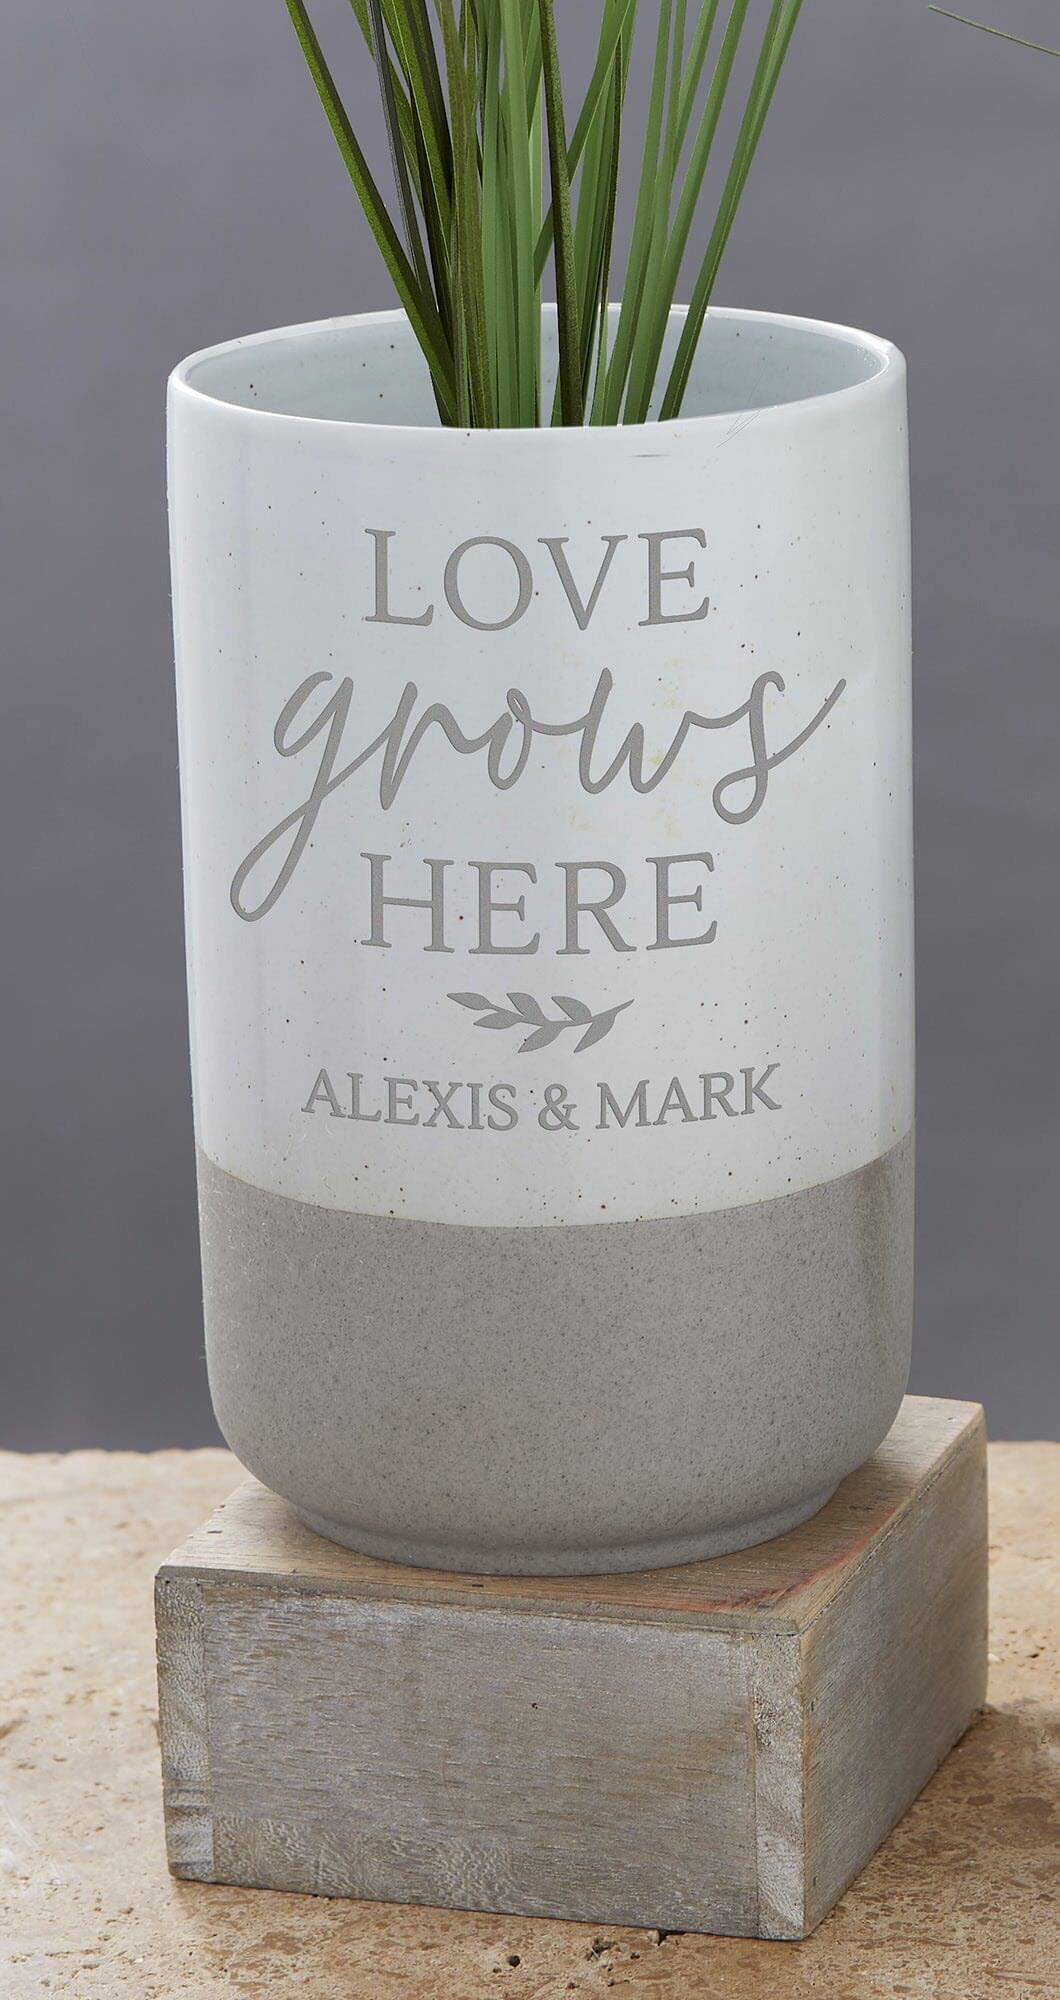 Love Grows here Cement Vase